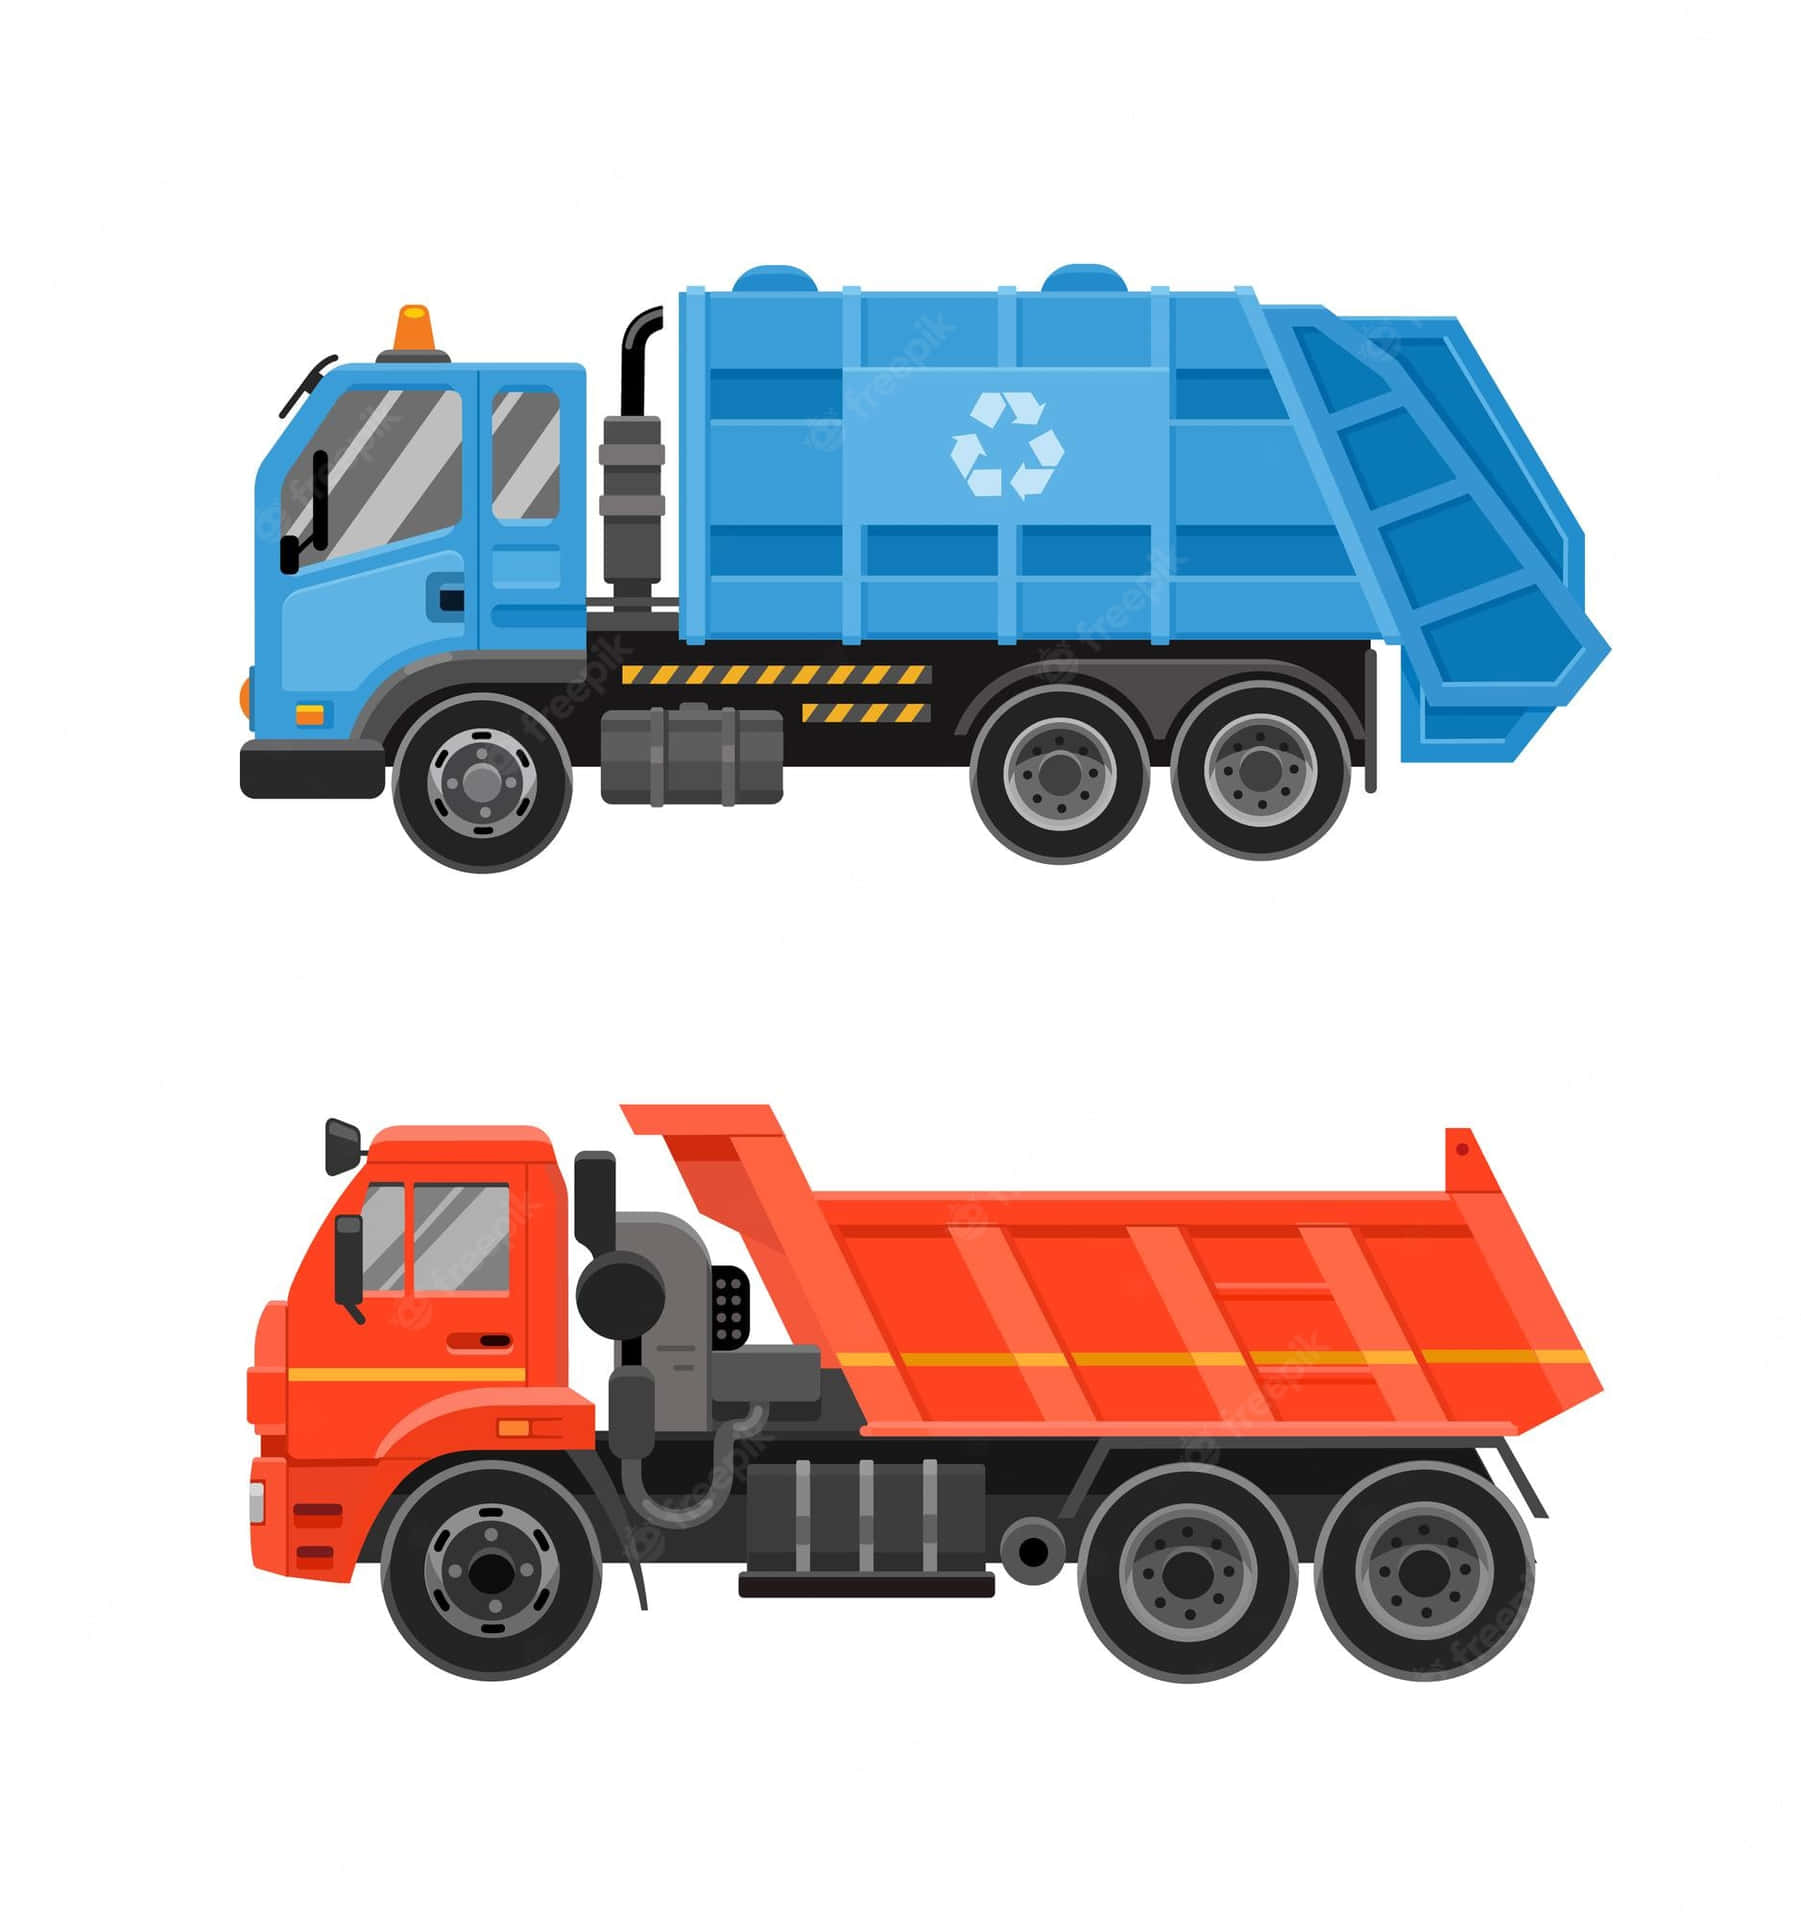 Garbage truck providing necessary waste management services